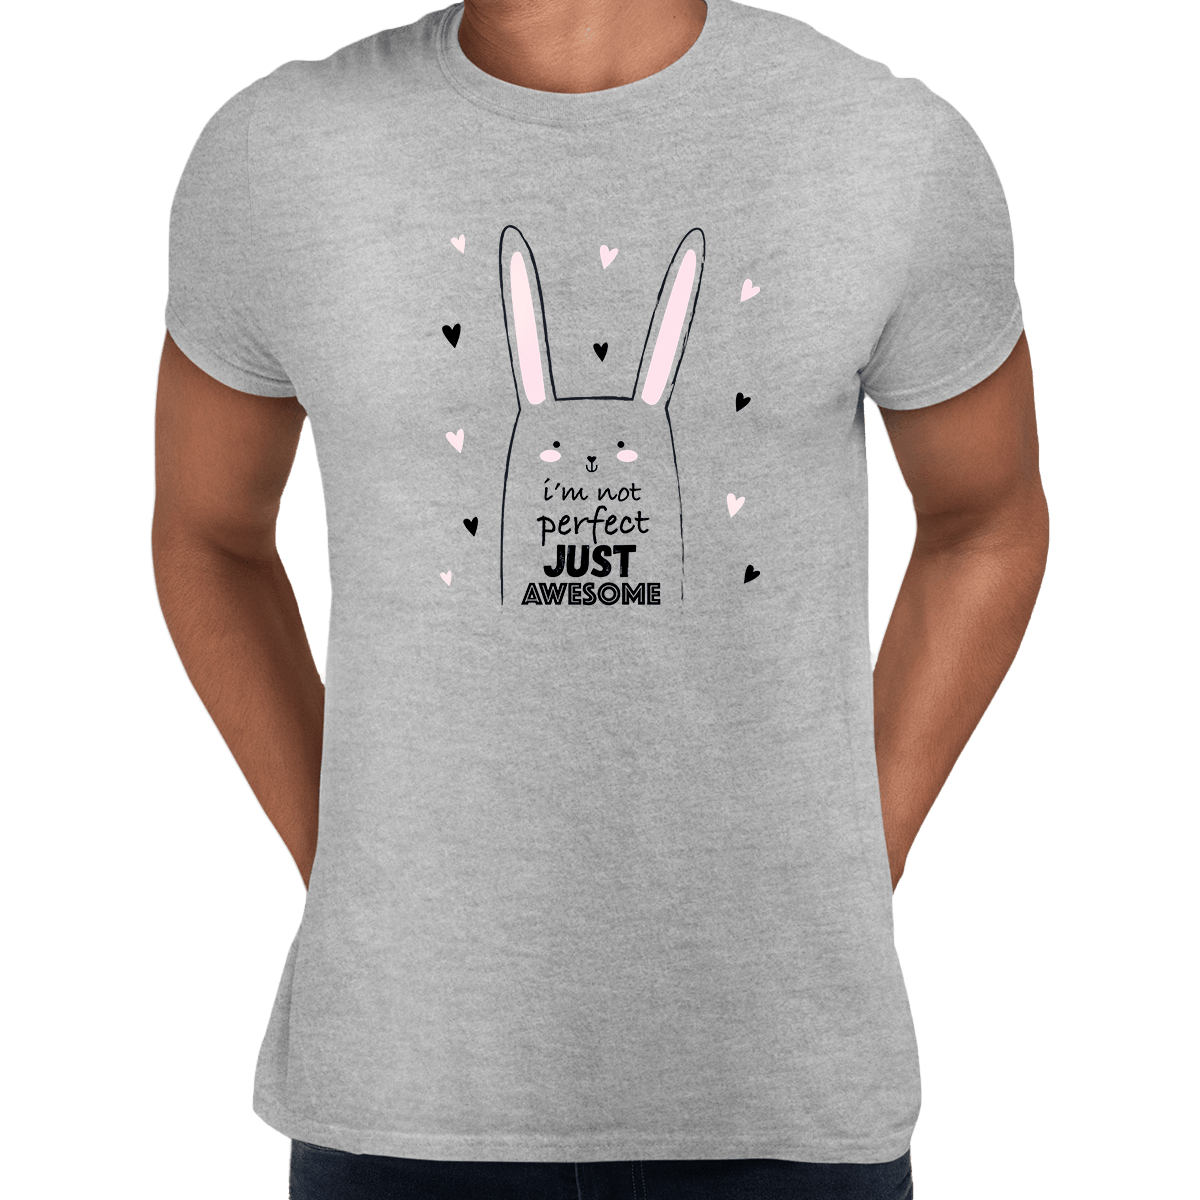 I am not perfect Just Awesome Funny Animal Quote T-shirt Print Unisex T-shirt - Kuzi Tees